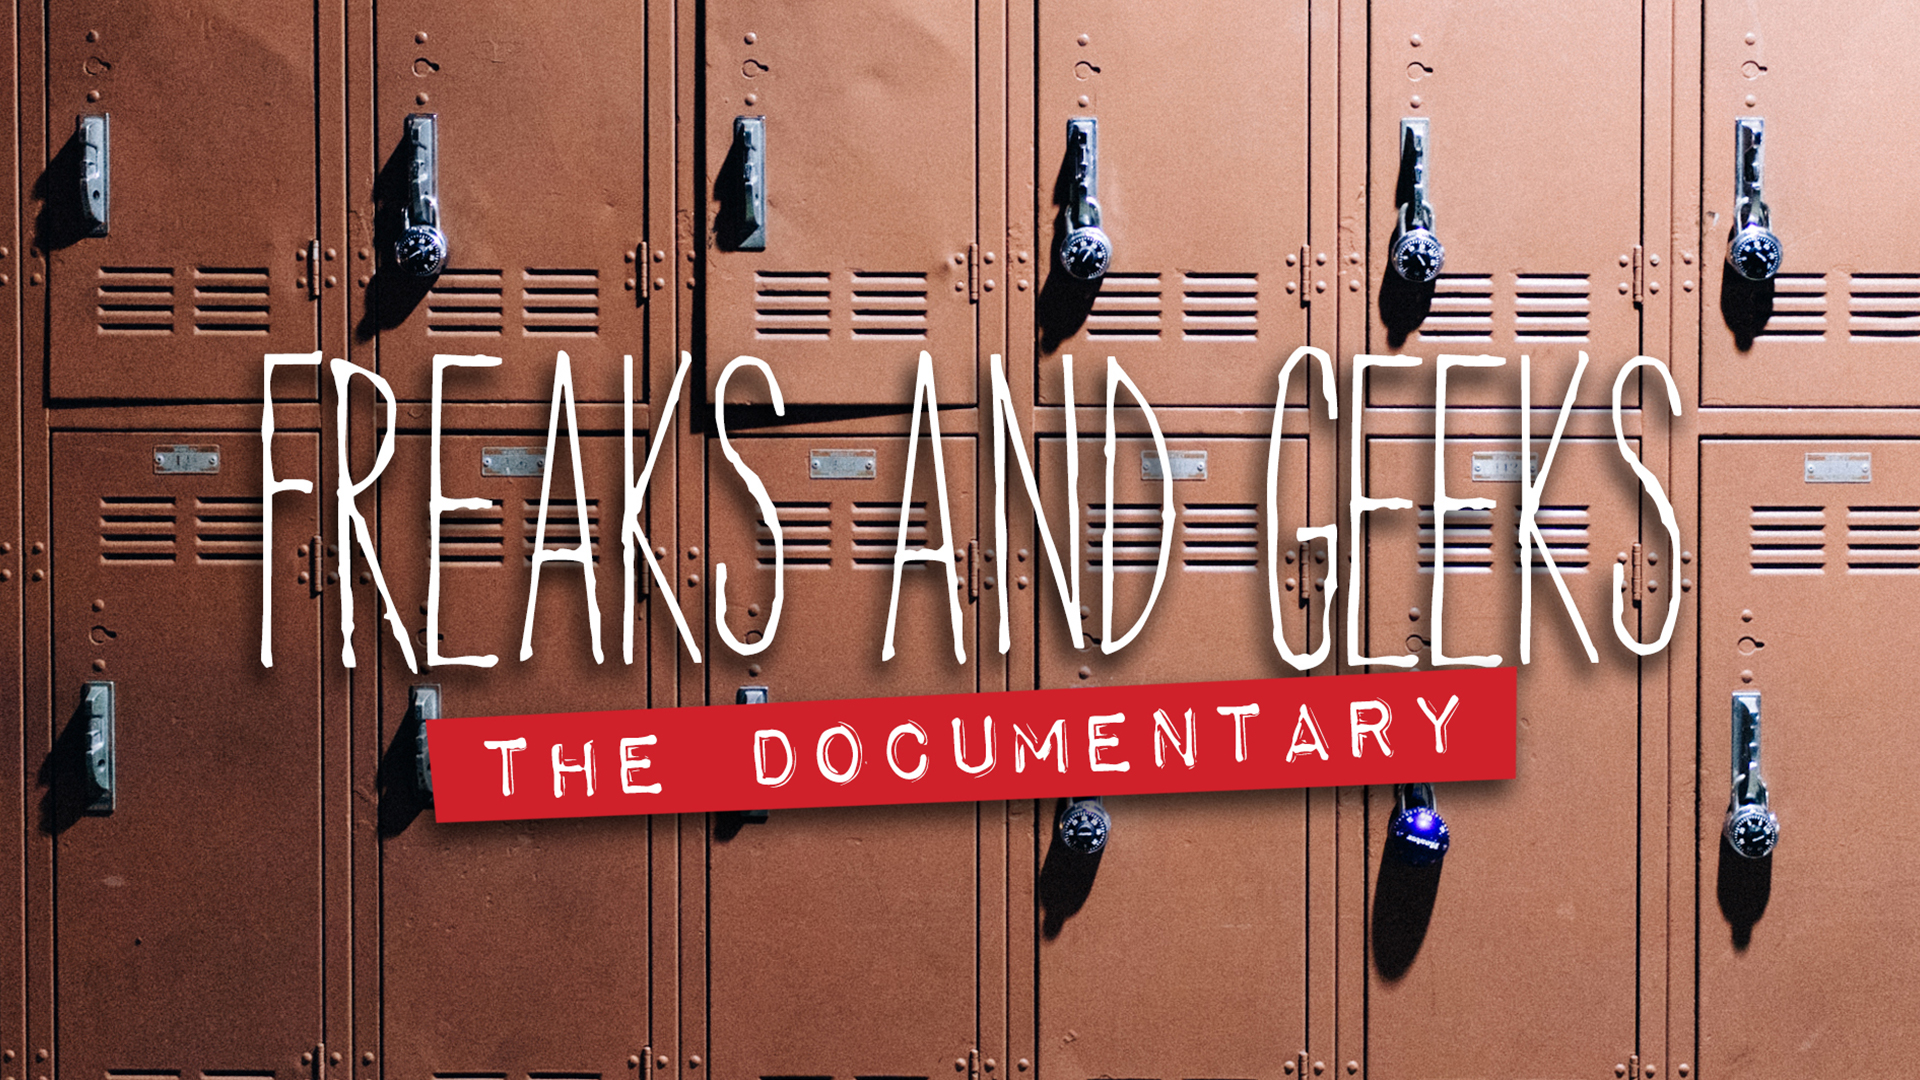 FREAKS AND GEEKS - THE DOCUMENTARY